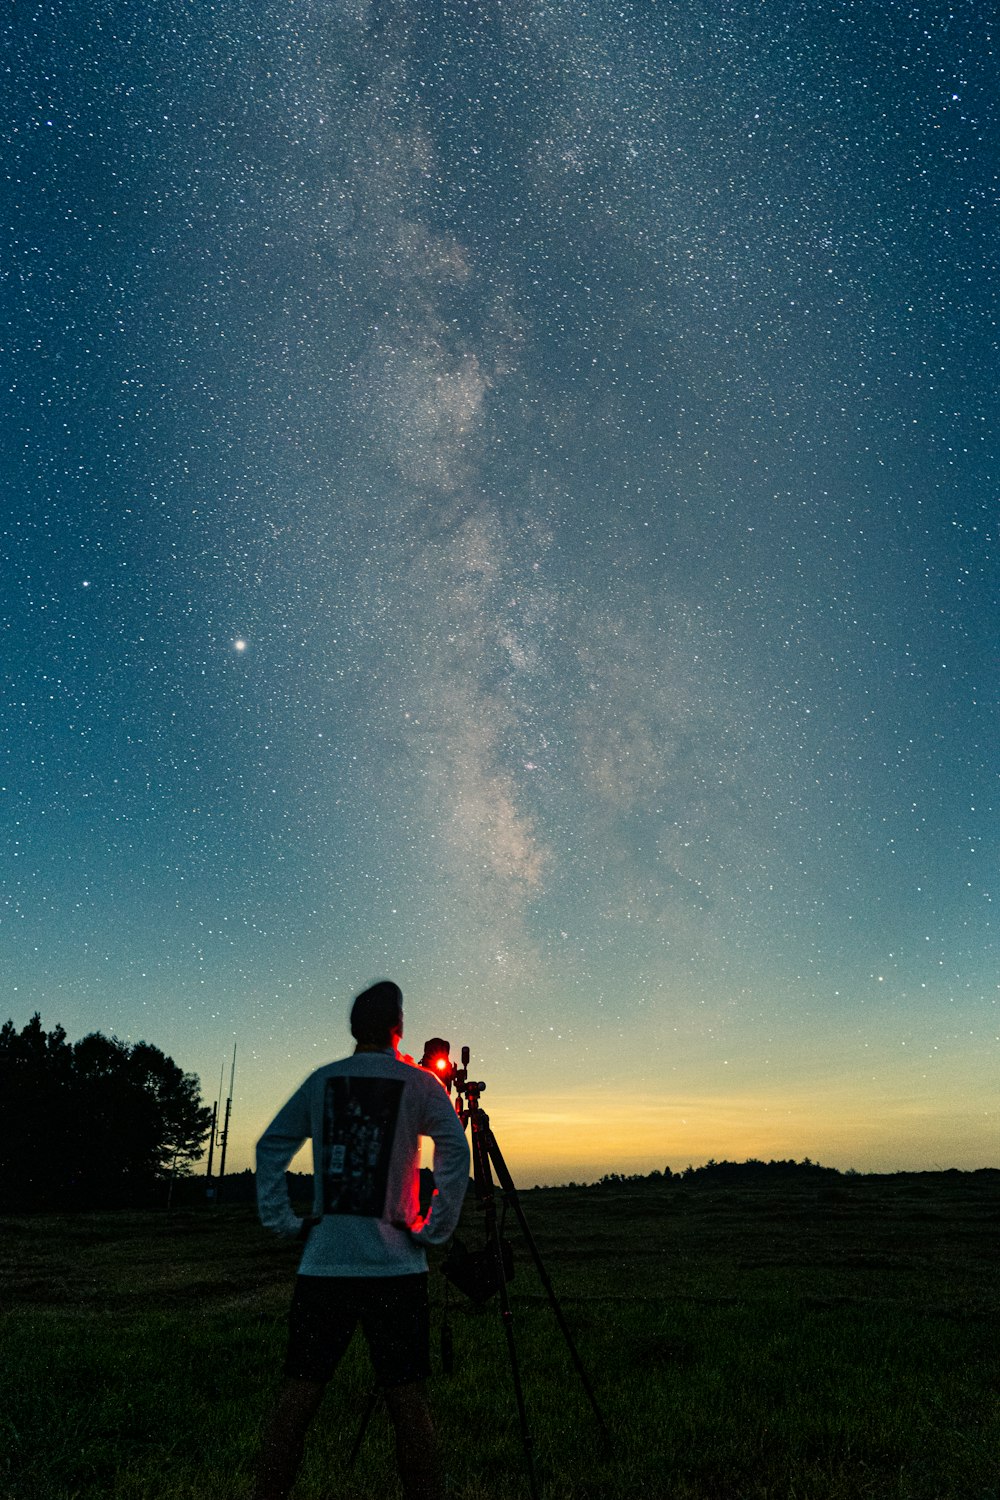 man in red shirt and black backpack standing on grass field under starry night